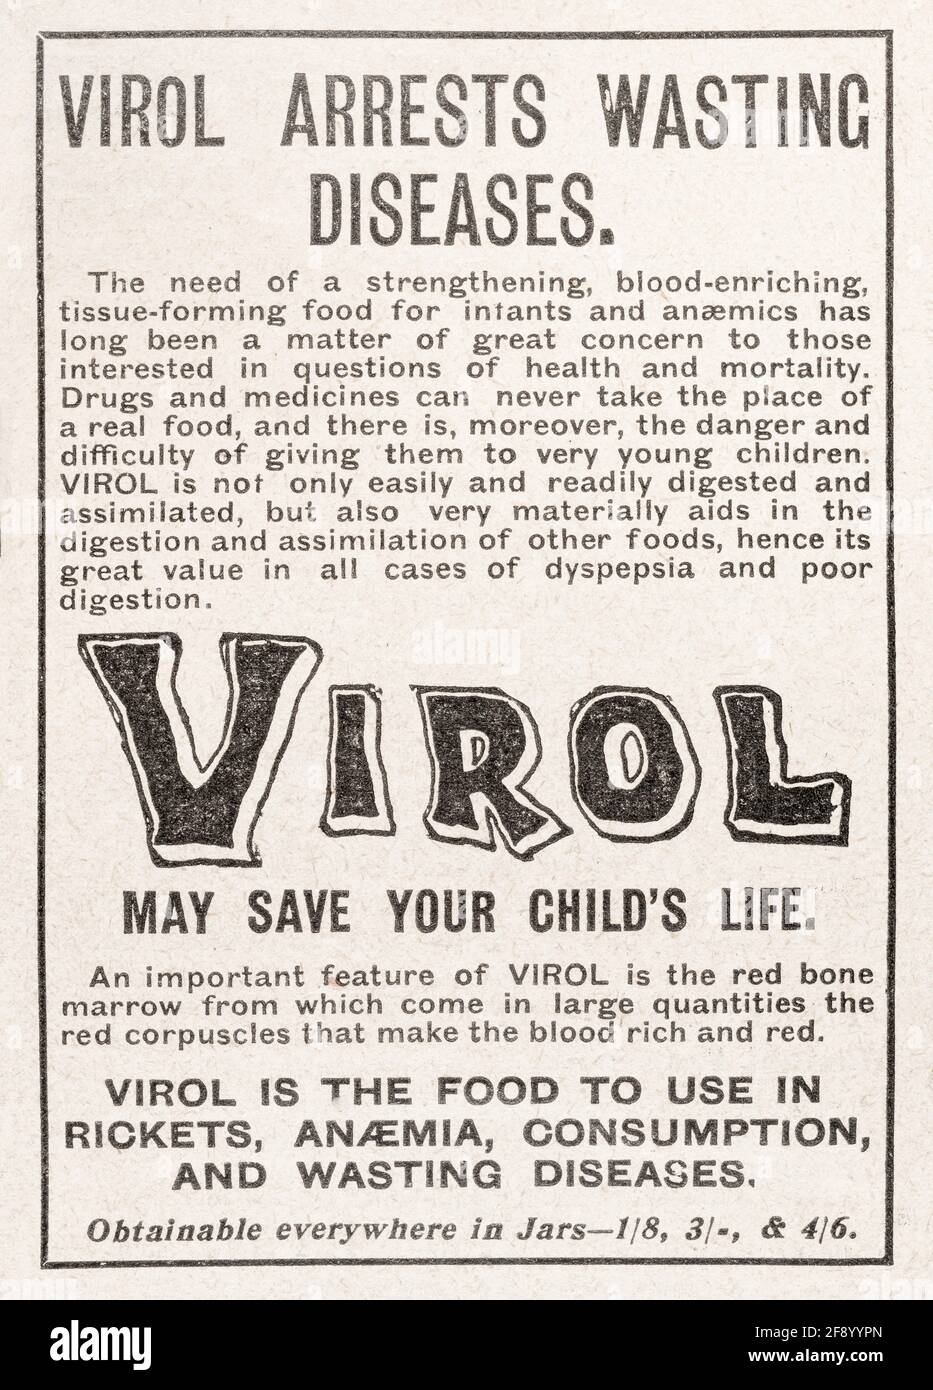 Old Virol baby food advert from 1902 - before the dawn of advertising standards. History of advertising, old health food adverts, medicinal cuisine. Stock Photo